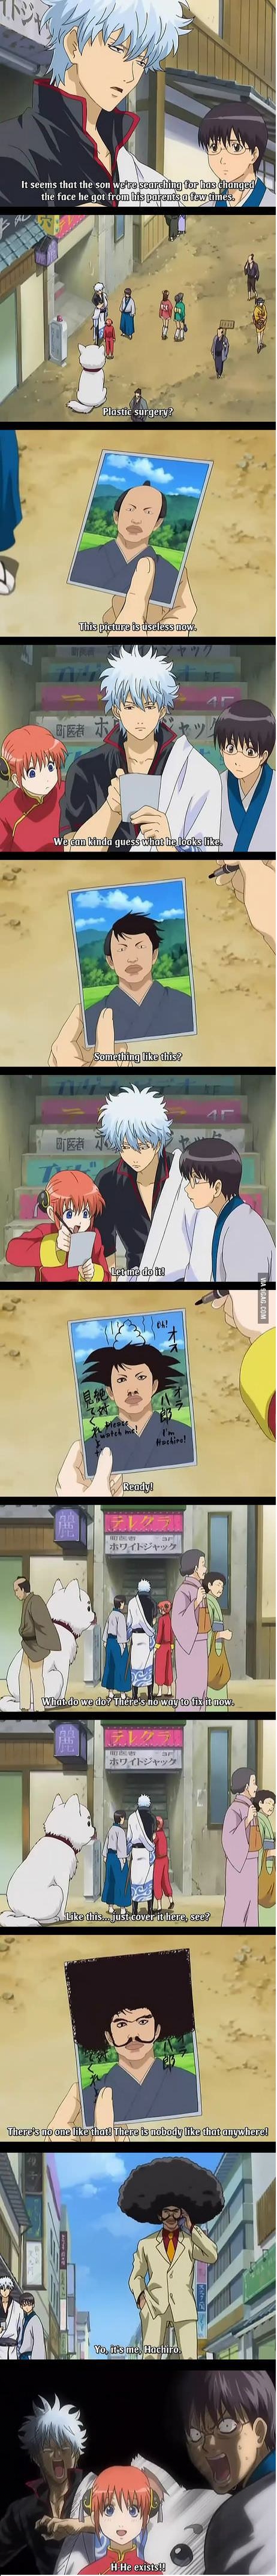 Just in Gintama